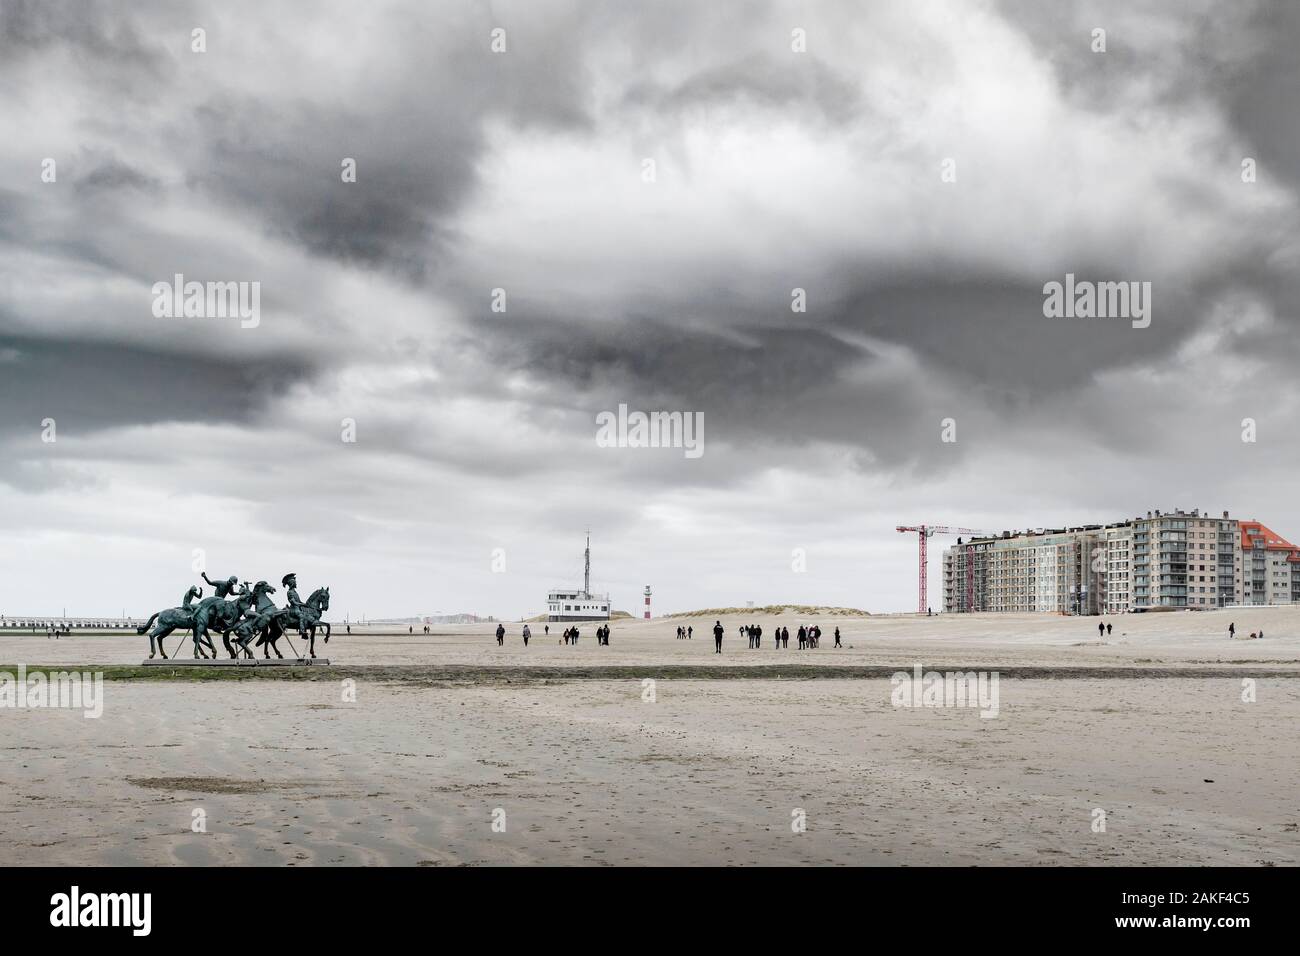 Nieuwpoort, Belgium (january 04, 2020): Pilotage building and statues on the beach Stock Photo